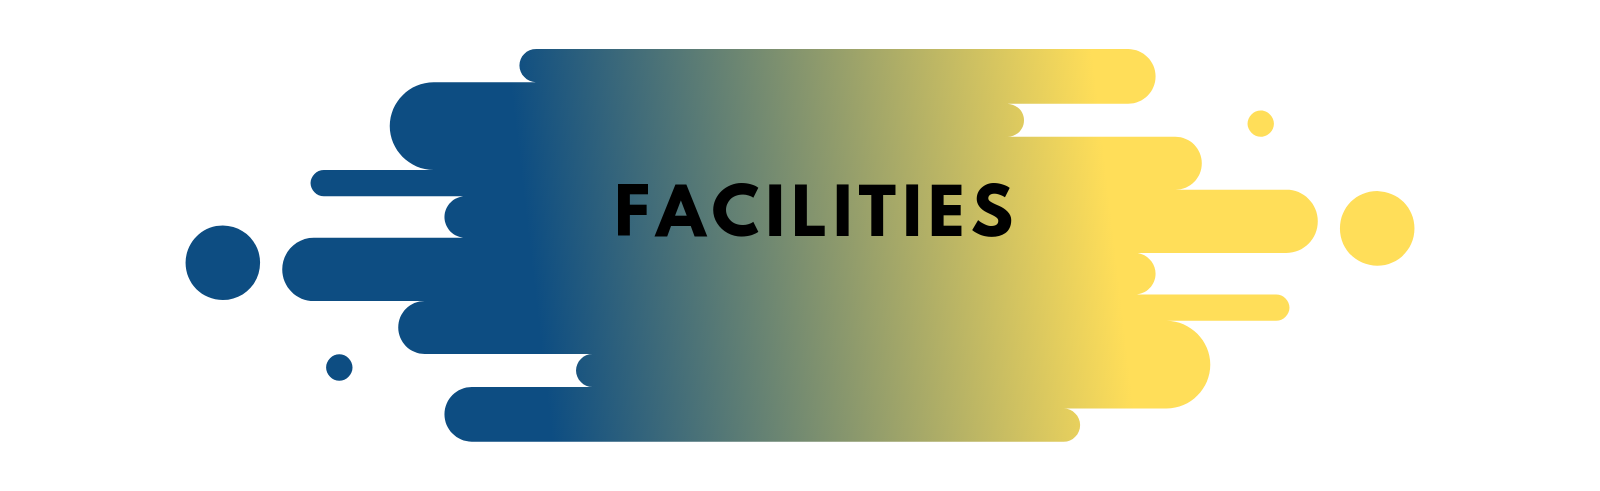 Facilities Page Banner